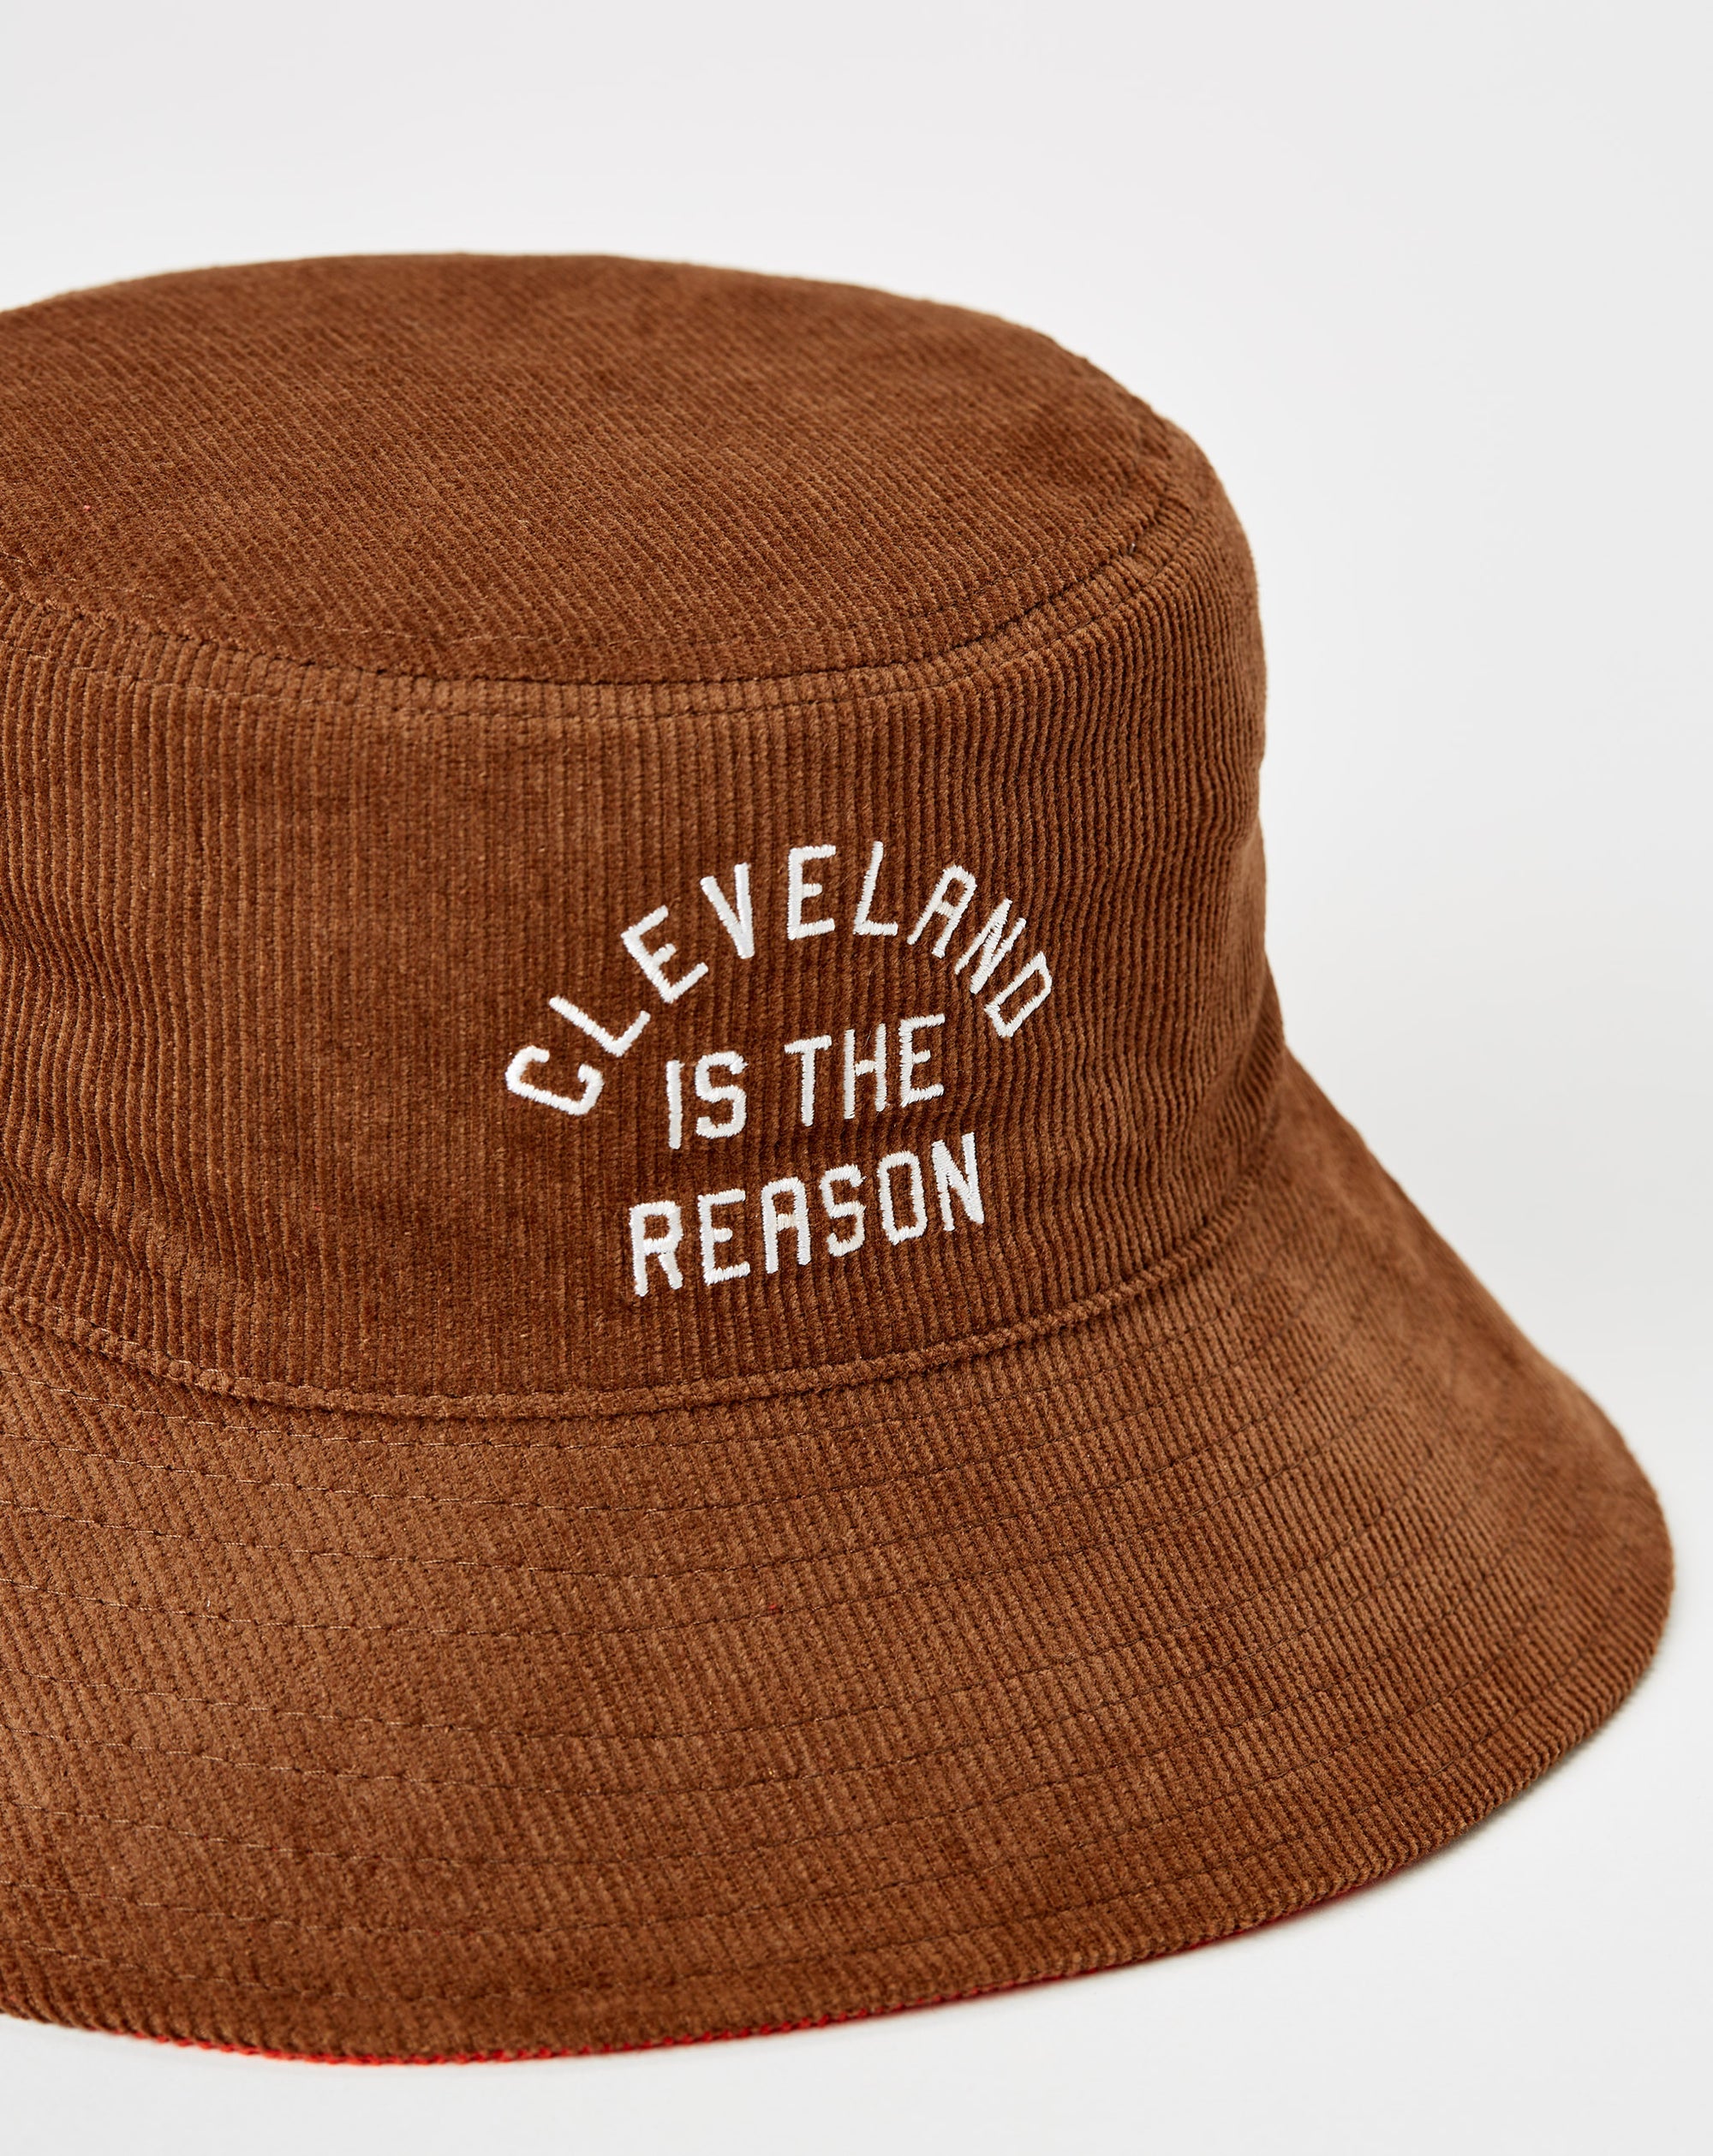 ilthy Cleveland is The Reason Reversible Bucket - Rule of Next Accessories